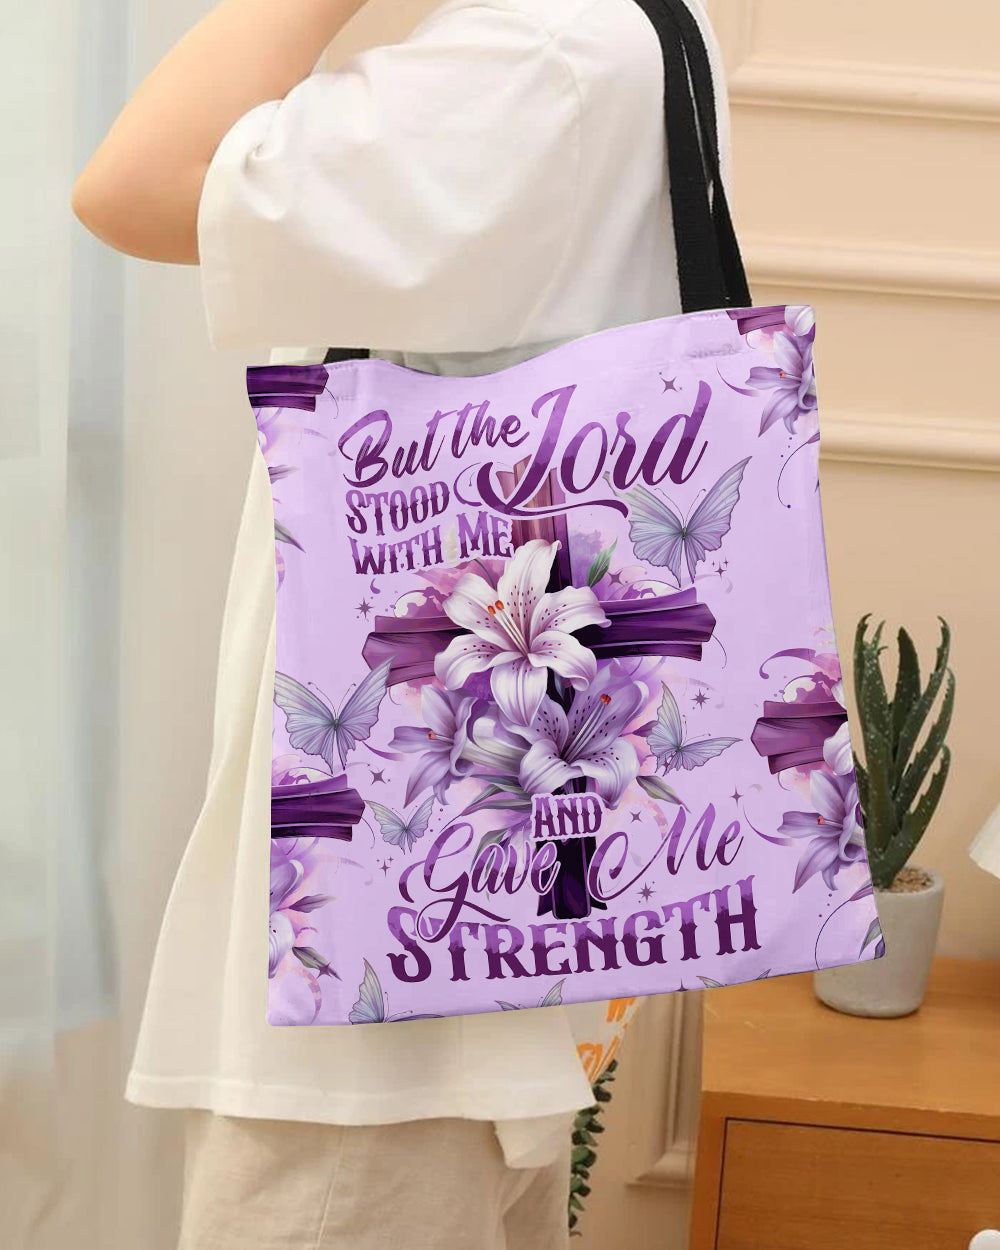 Lord Stood With Me Tote Bag - Tytd1008234